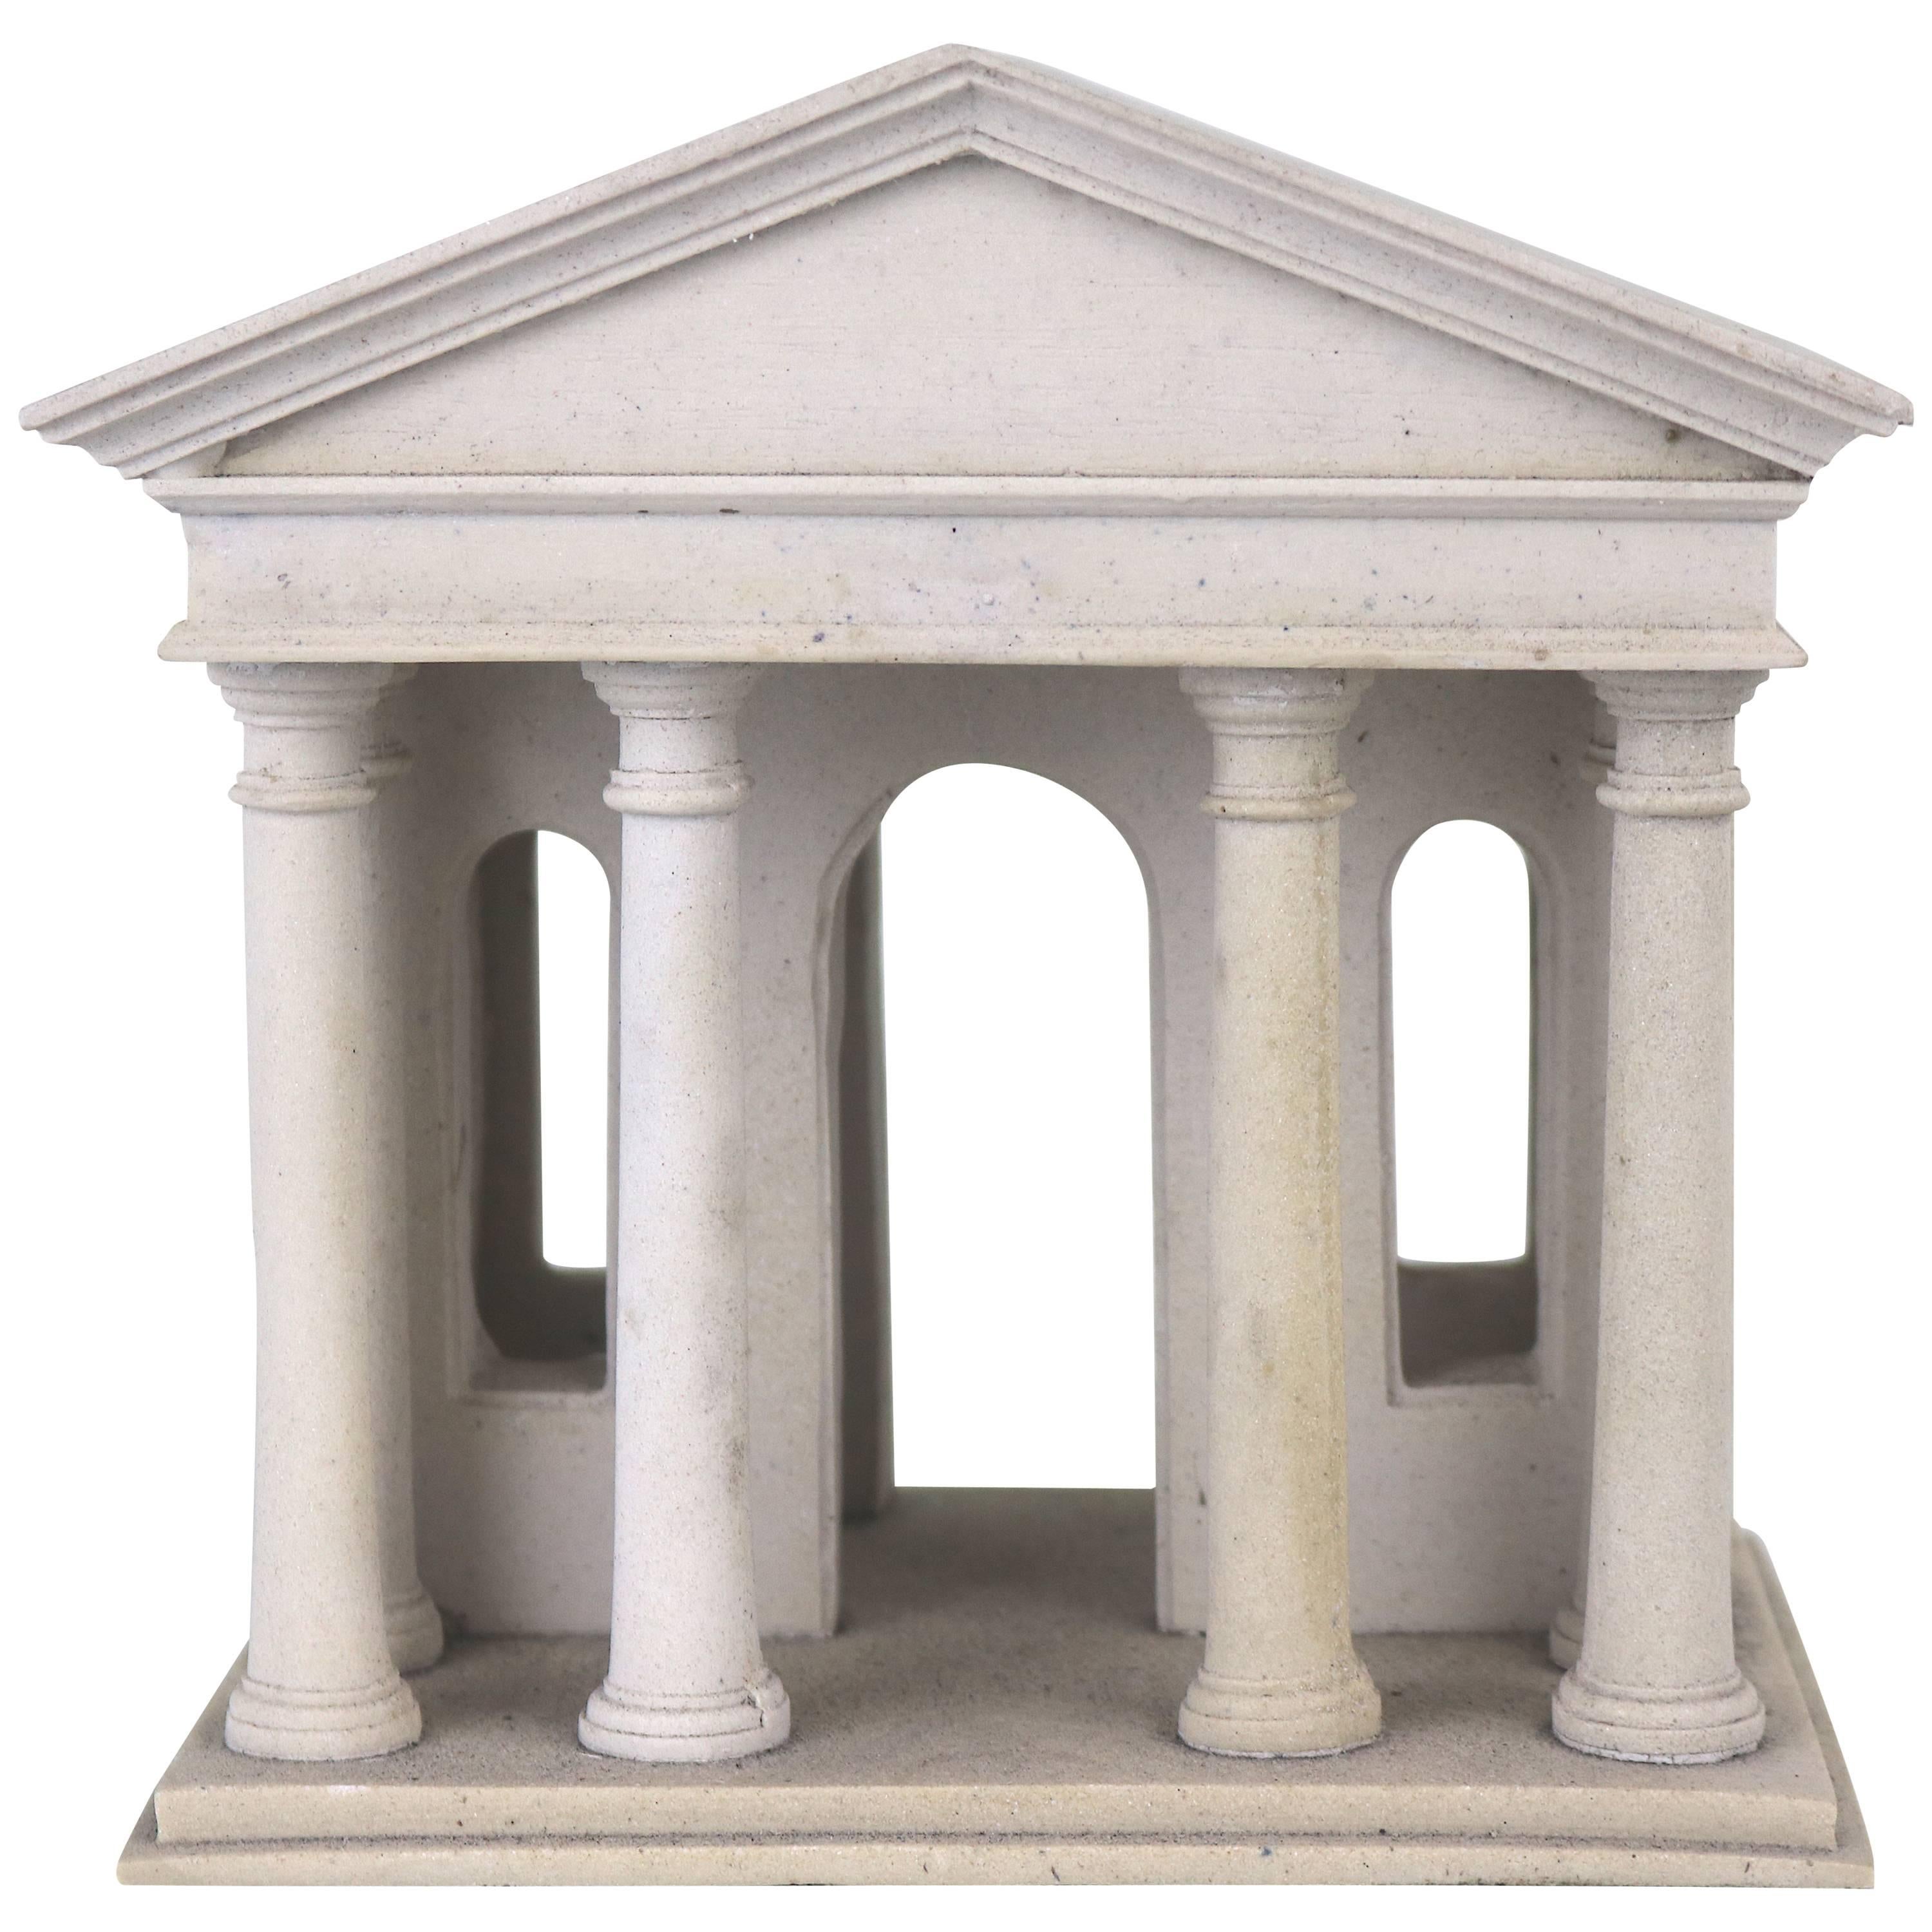  Vintage Architectural Model of an Early Greek Temple For Sale